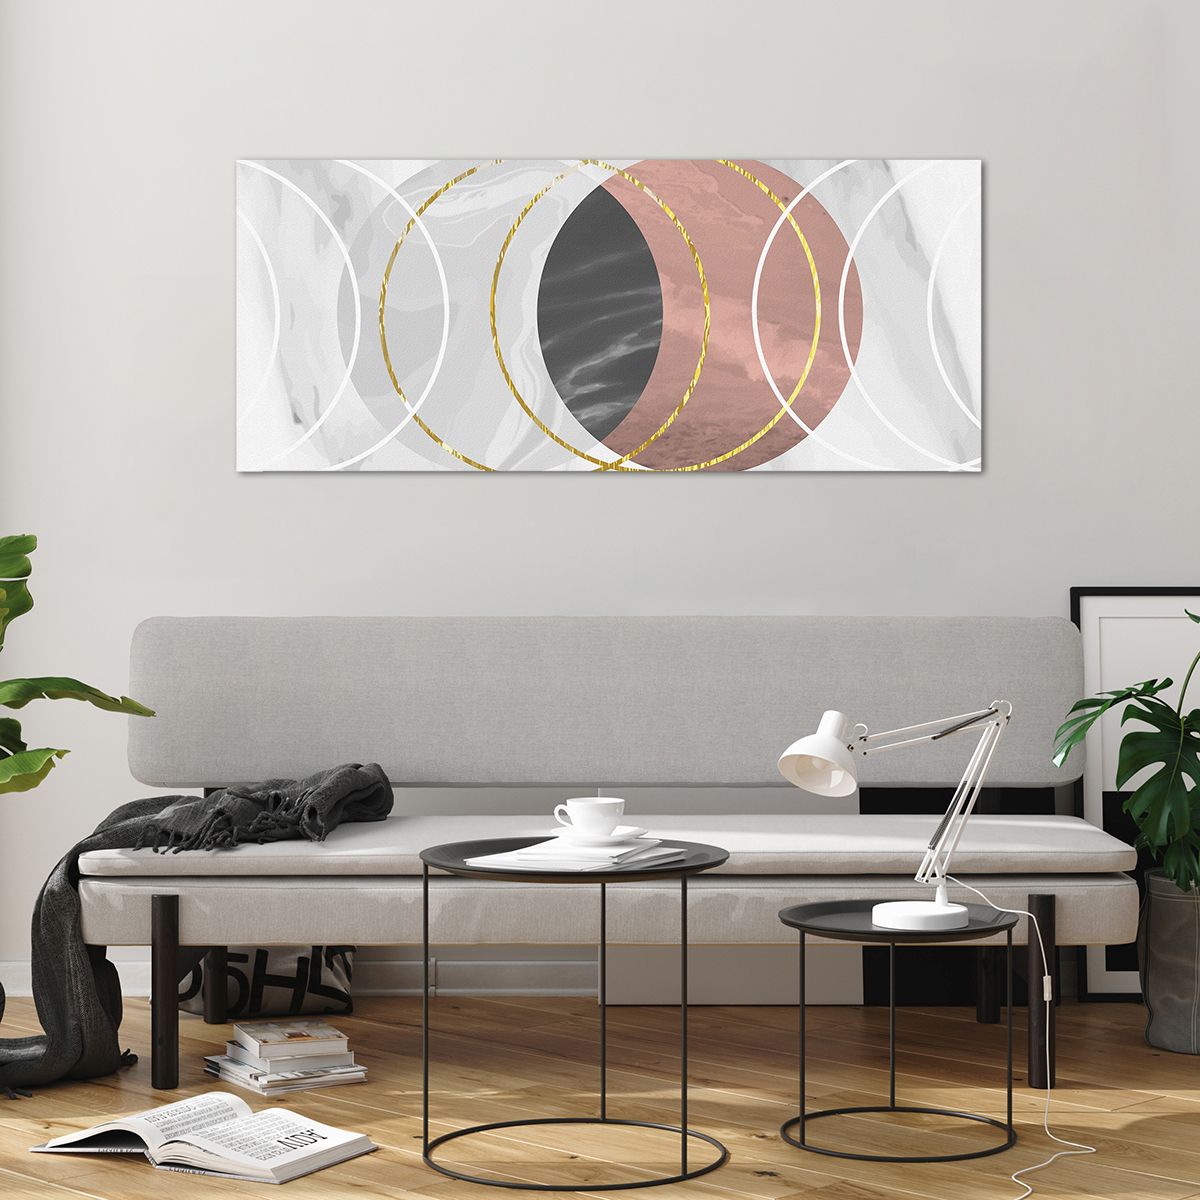 Glass picture  Abstraction, Glass picture  Art, Glass picture  Circles, Glass picture  Modern Art, Glass picture  Graphics